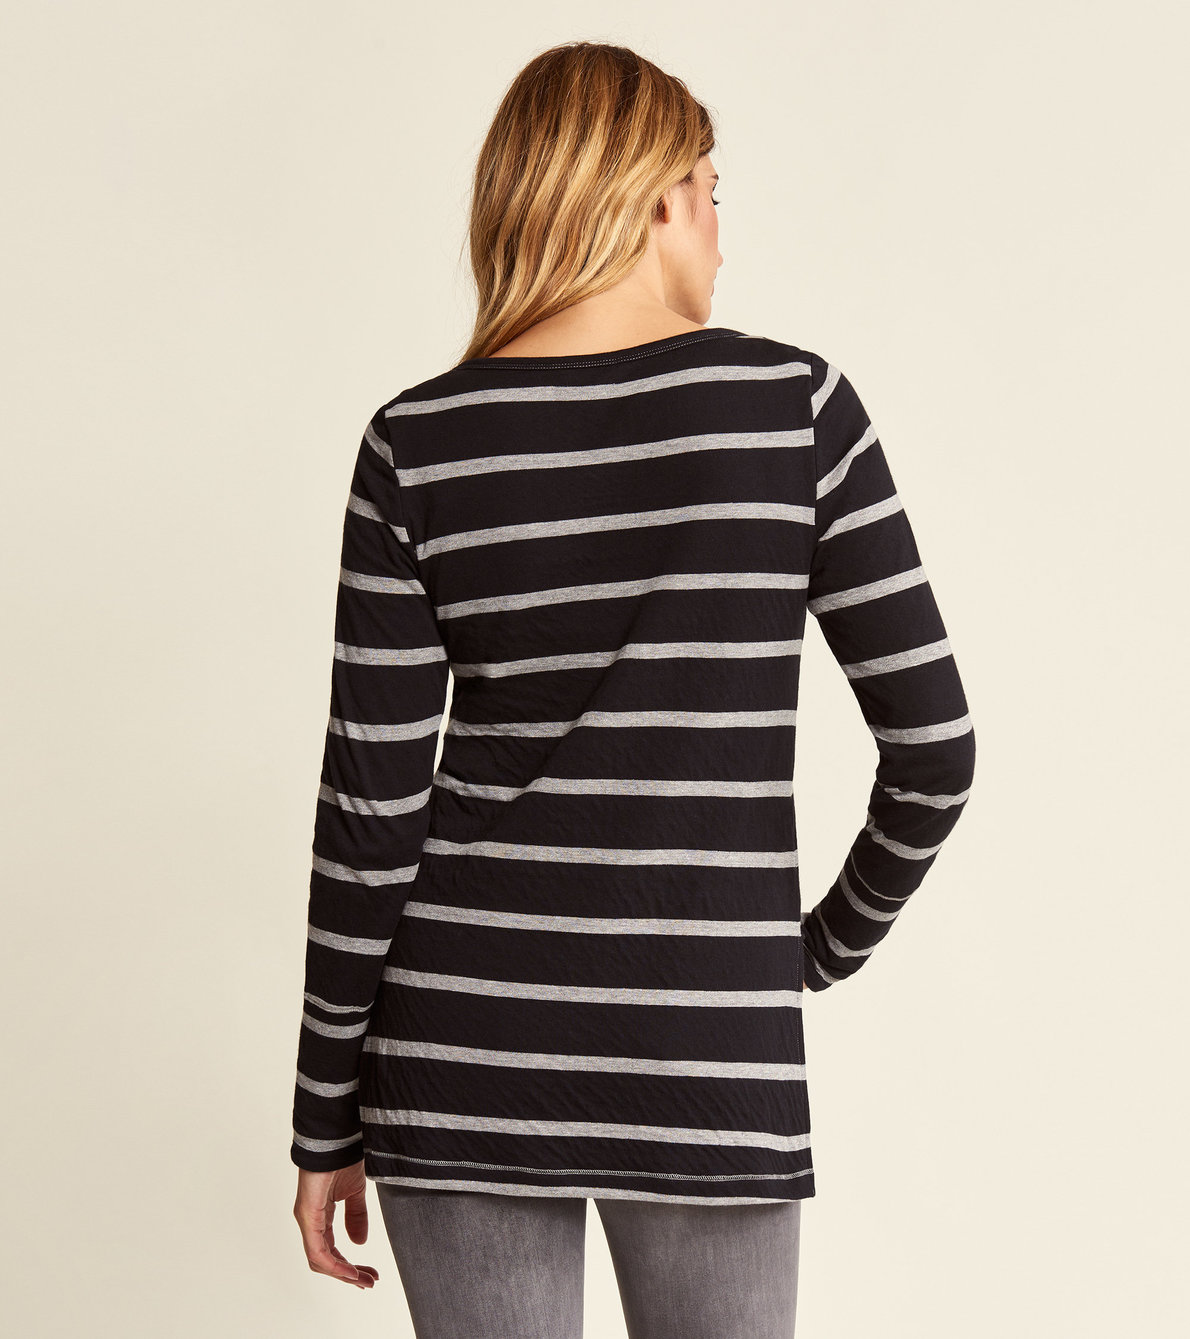 View larger image of Boat Neck Tee - Grey Stripes